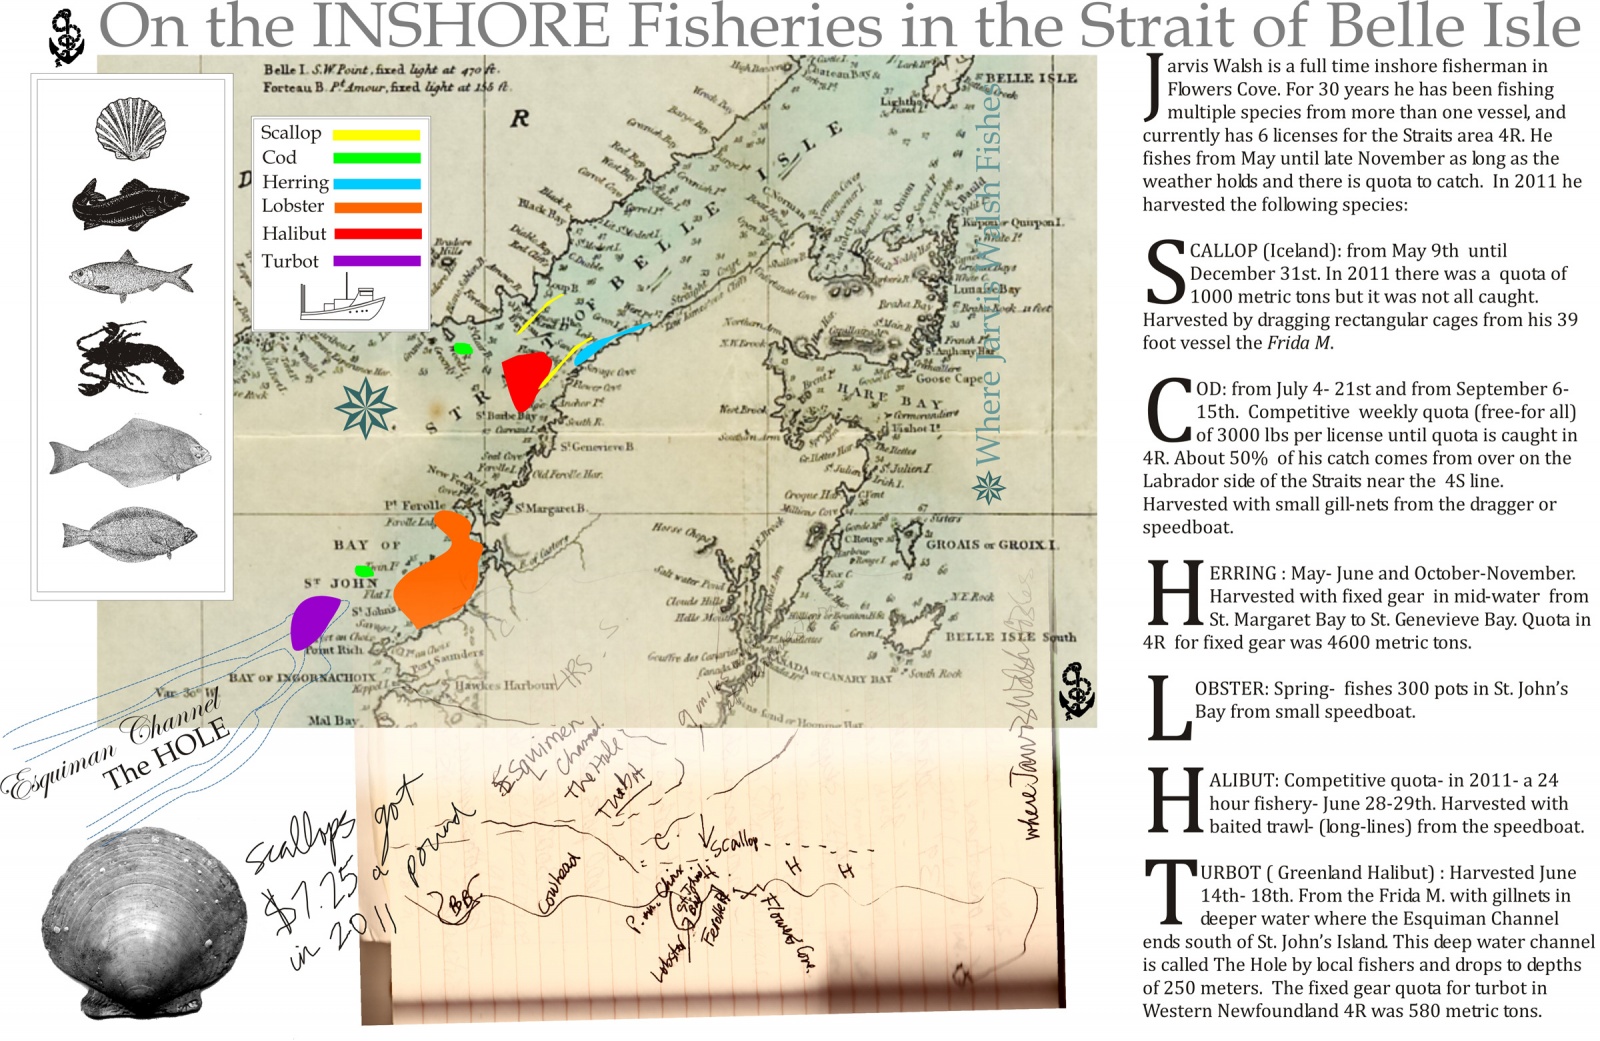 On the Inshore Fisheries in the Strait of Belle Isle